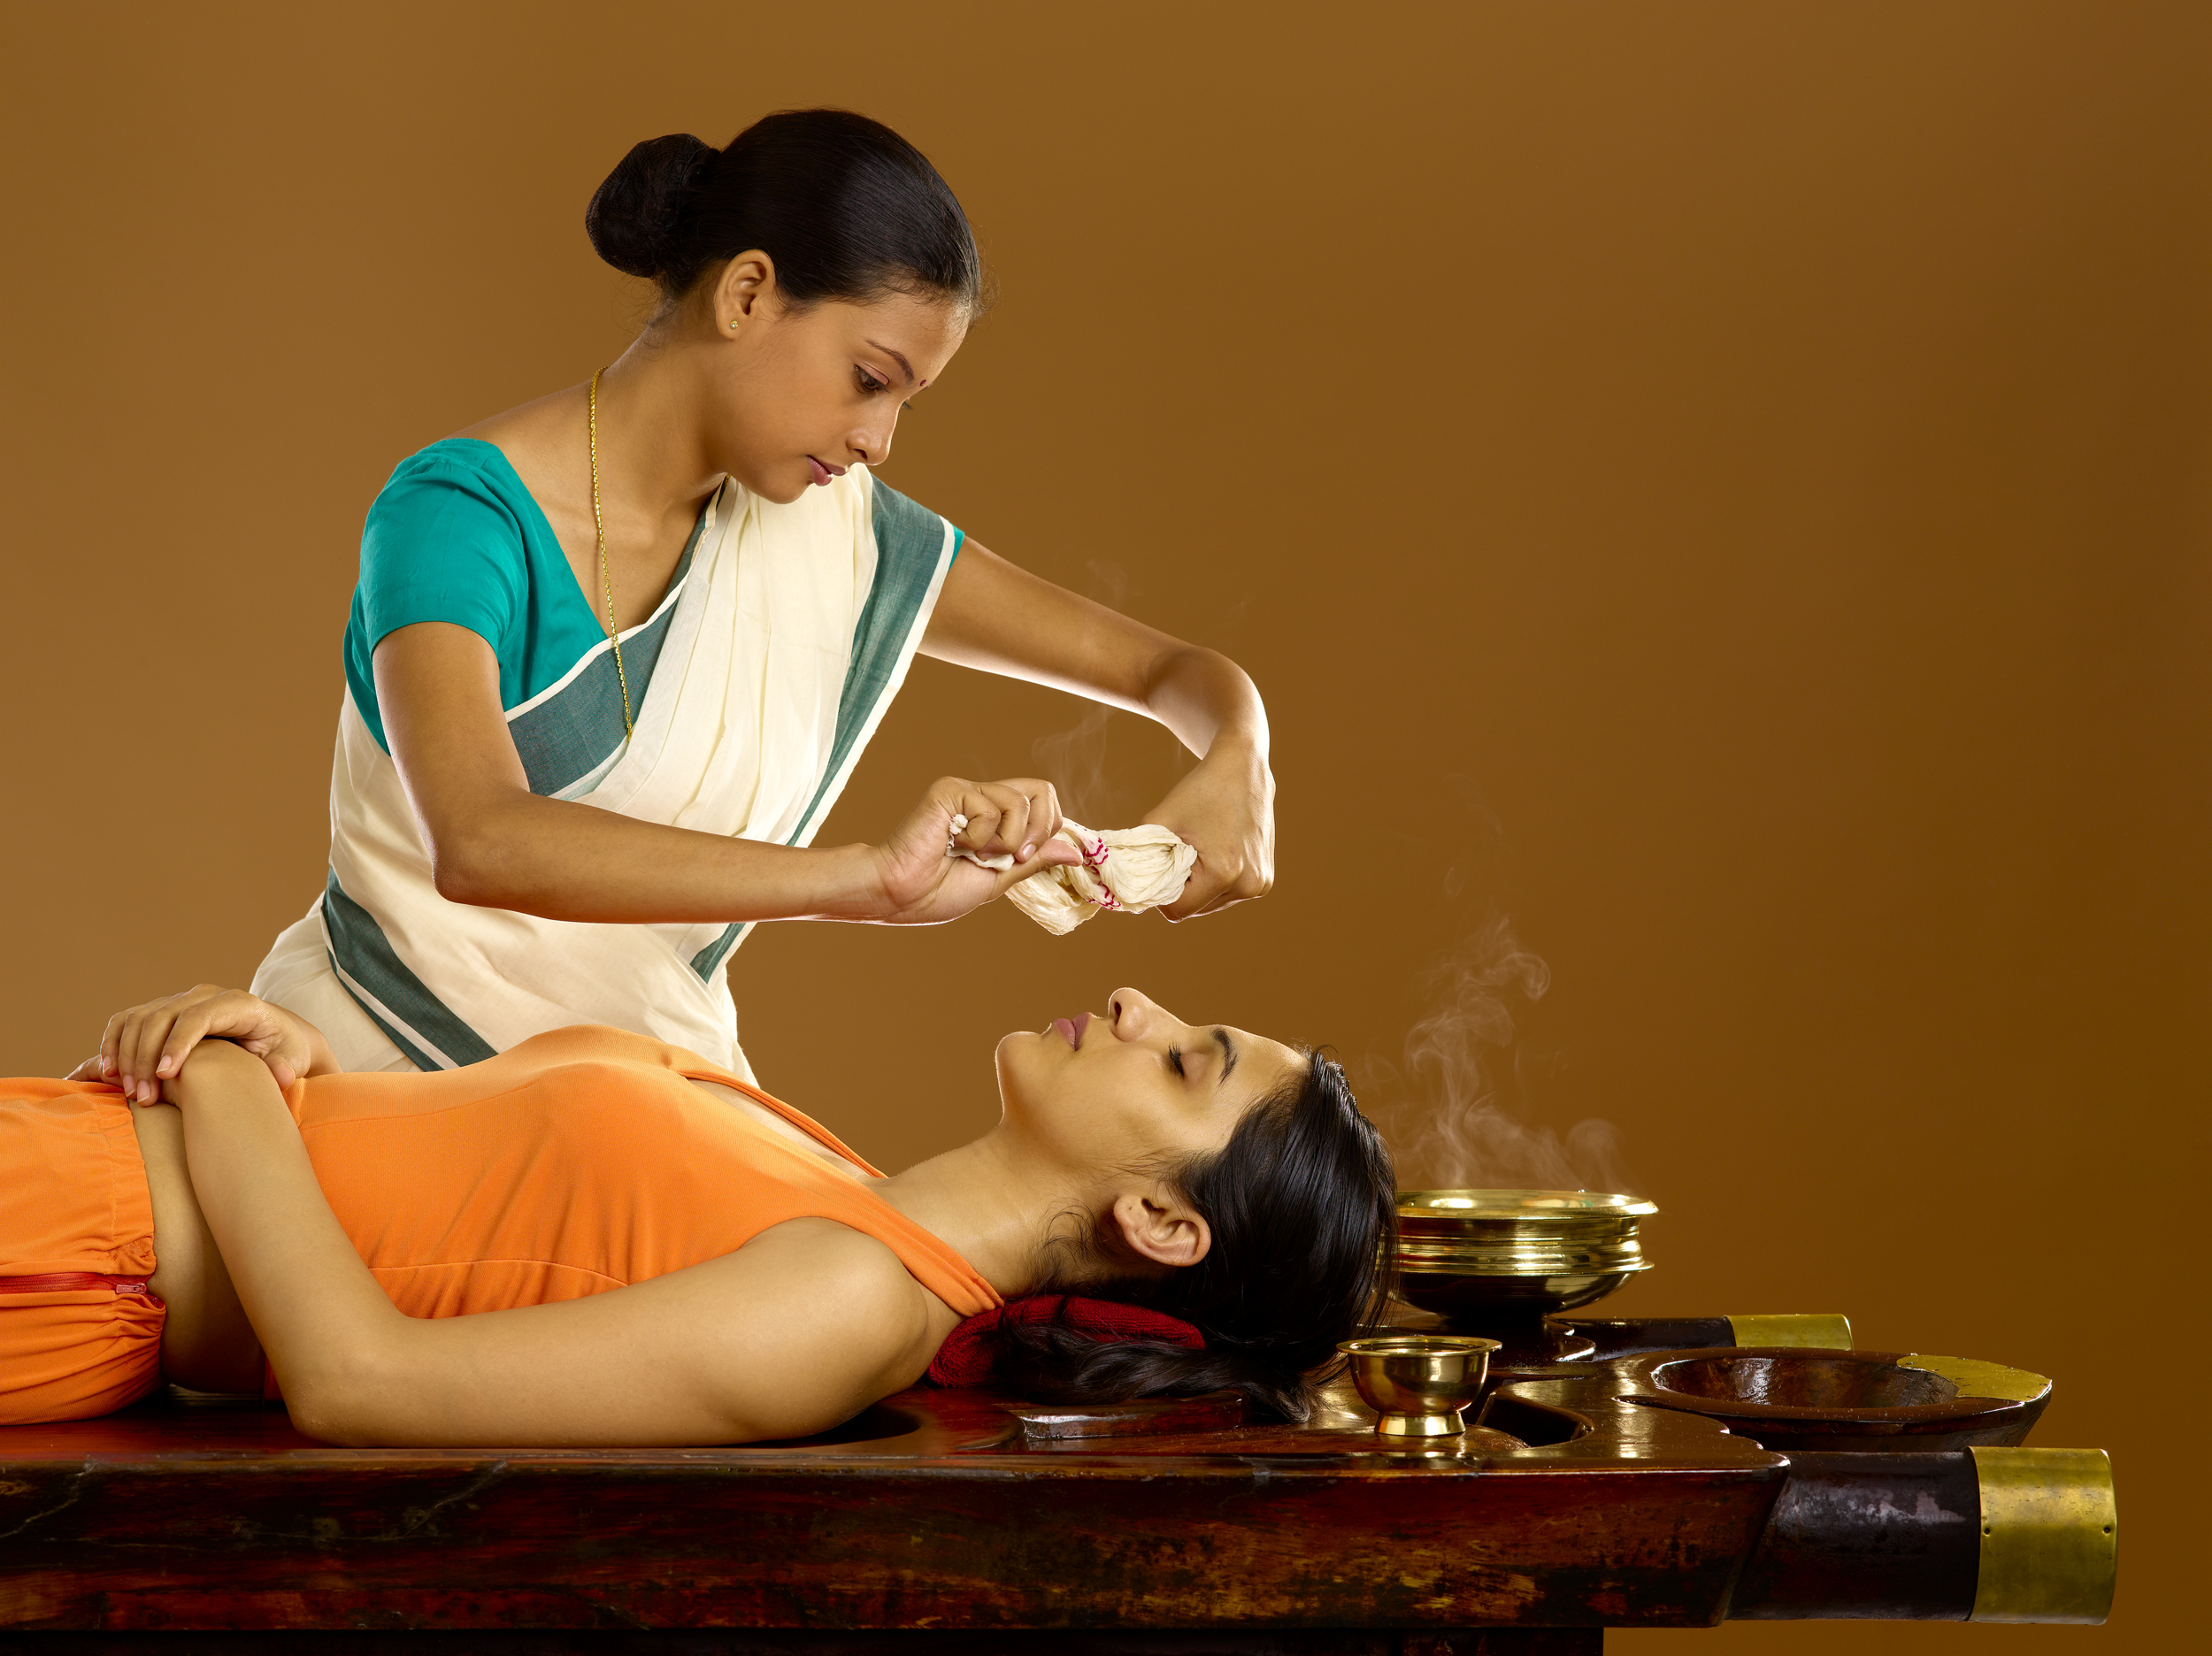 Panchakarma Treatment in Adelaide – Five Cleansing Therapies